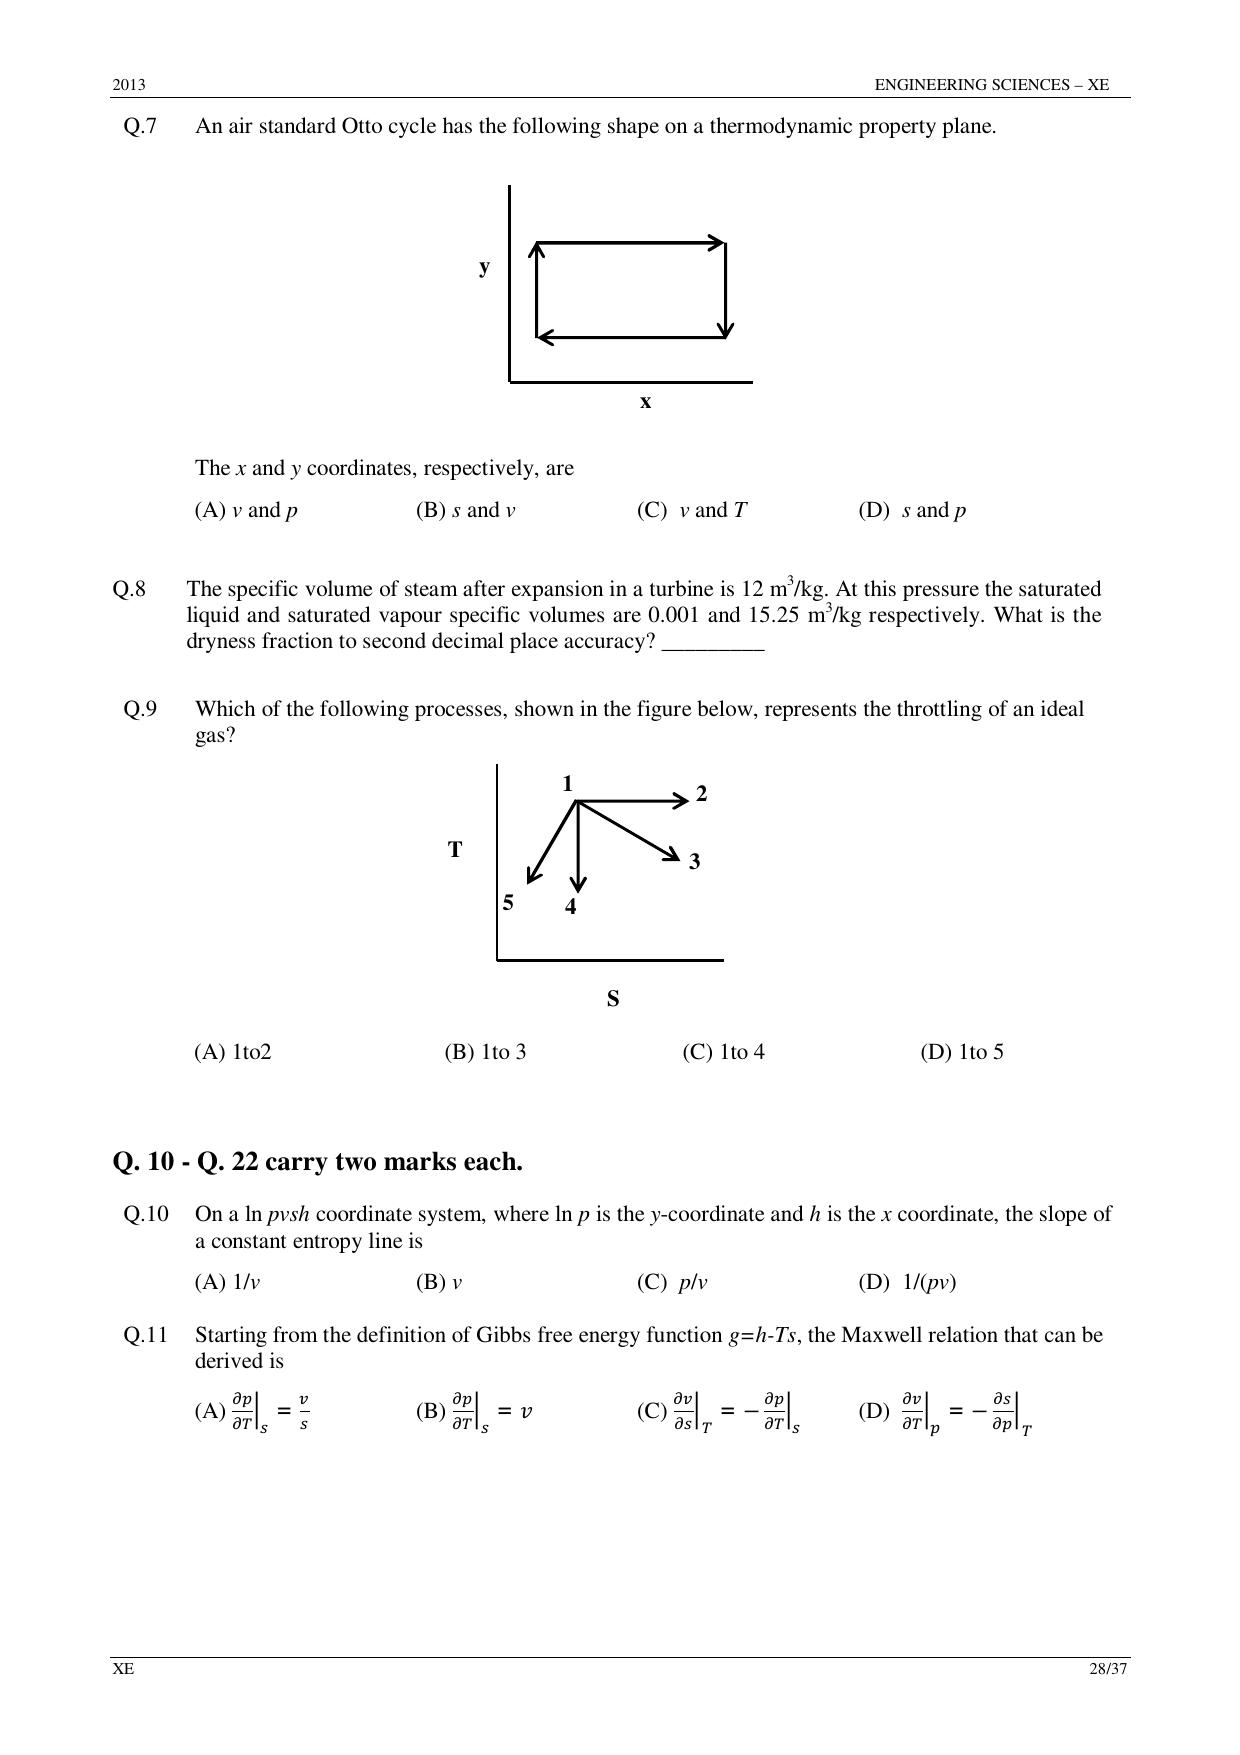 GATE 2013 Engineering Sciences (XE) Question Paper with Answer Key - Page 28